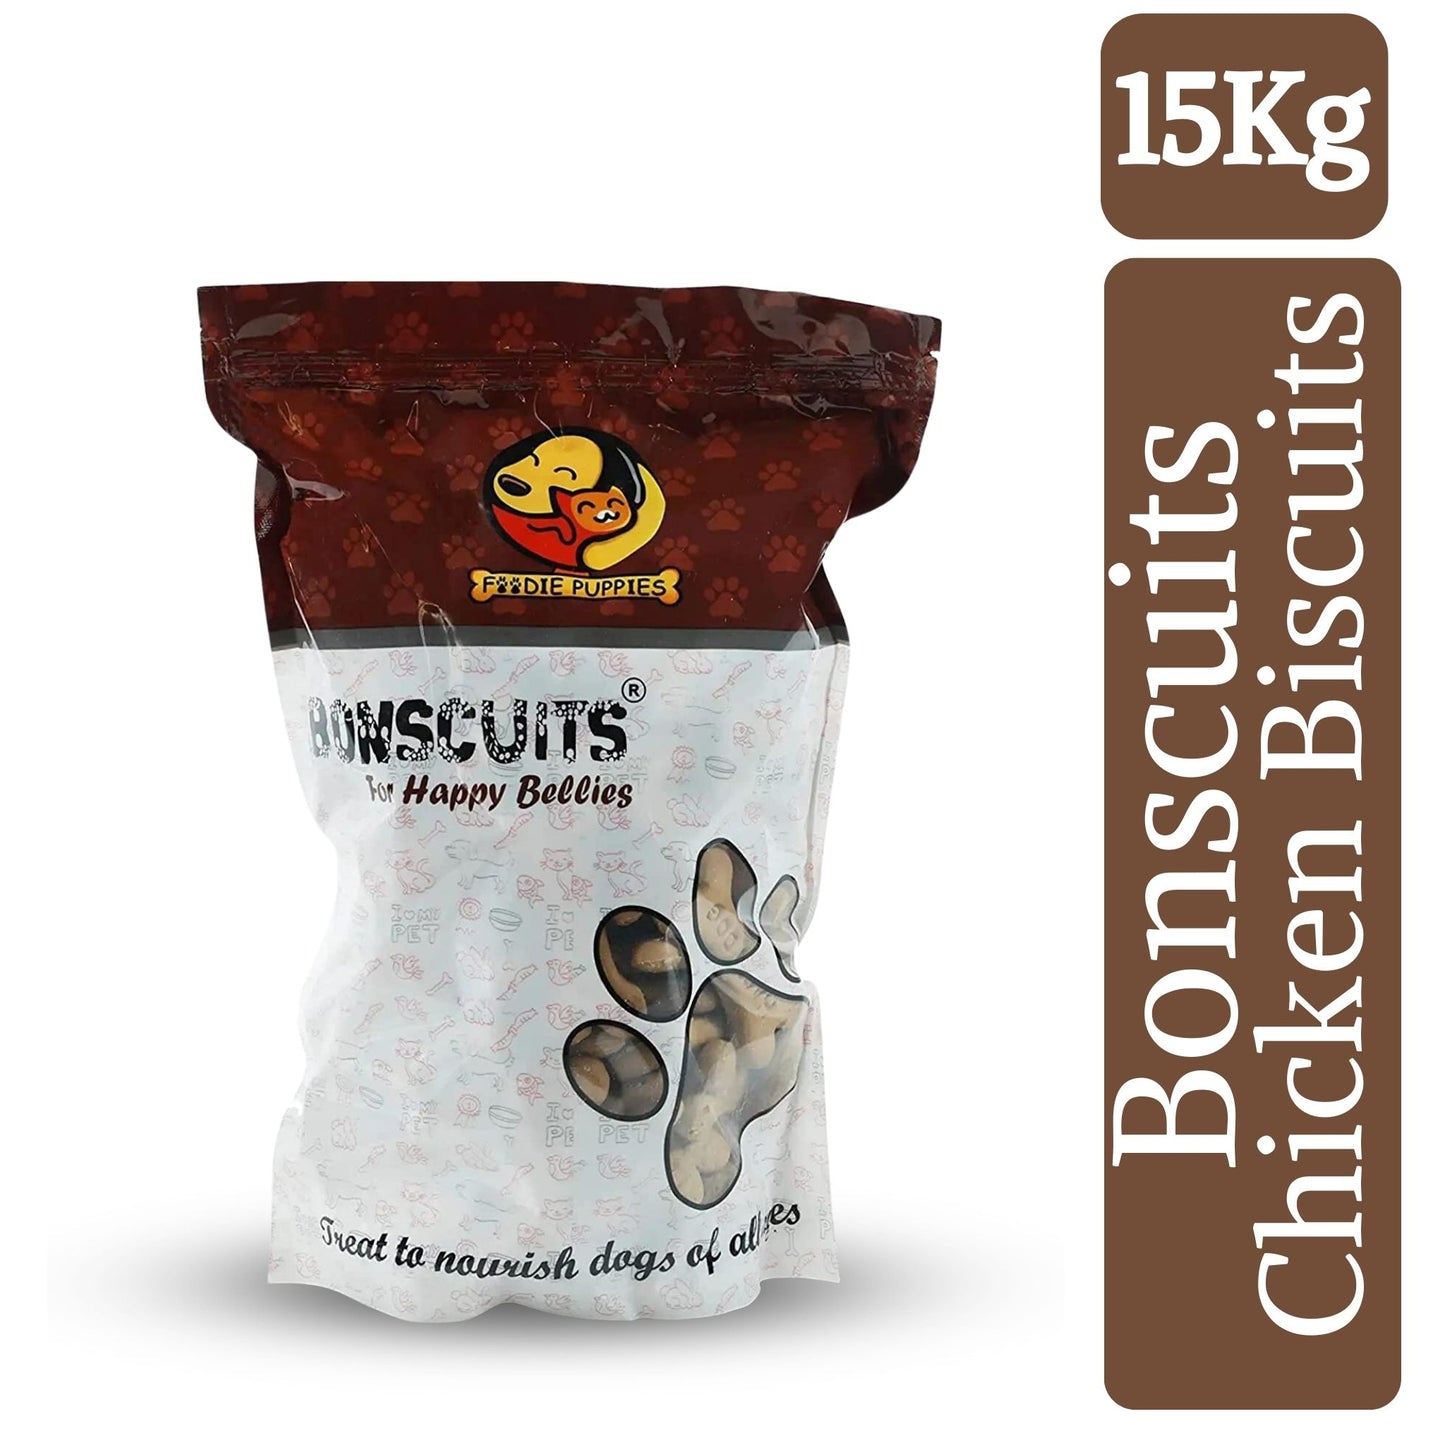 Foodie Puppies Freshly Baked Chicken Biscuits for Adult Dogs - 15Kg